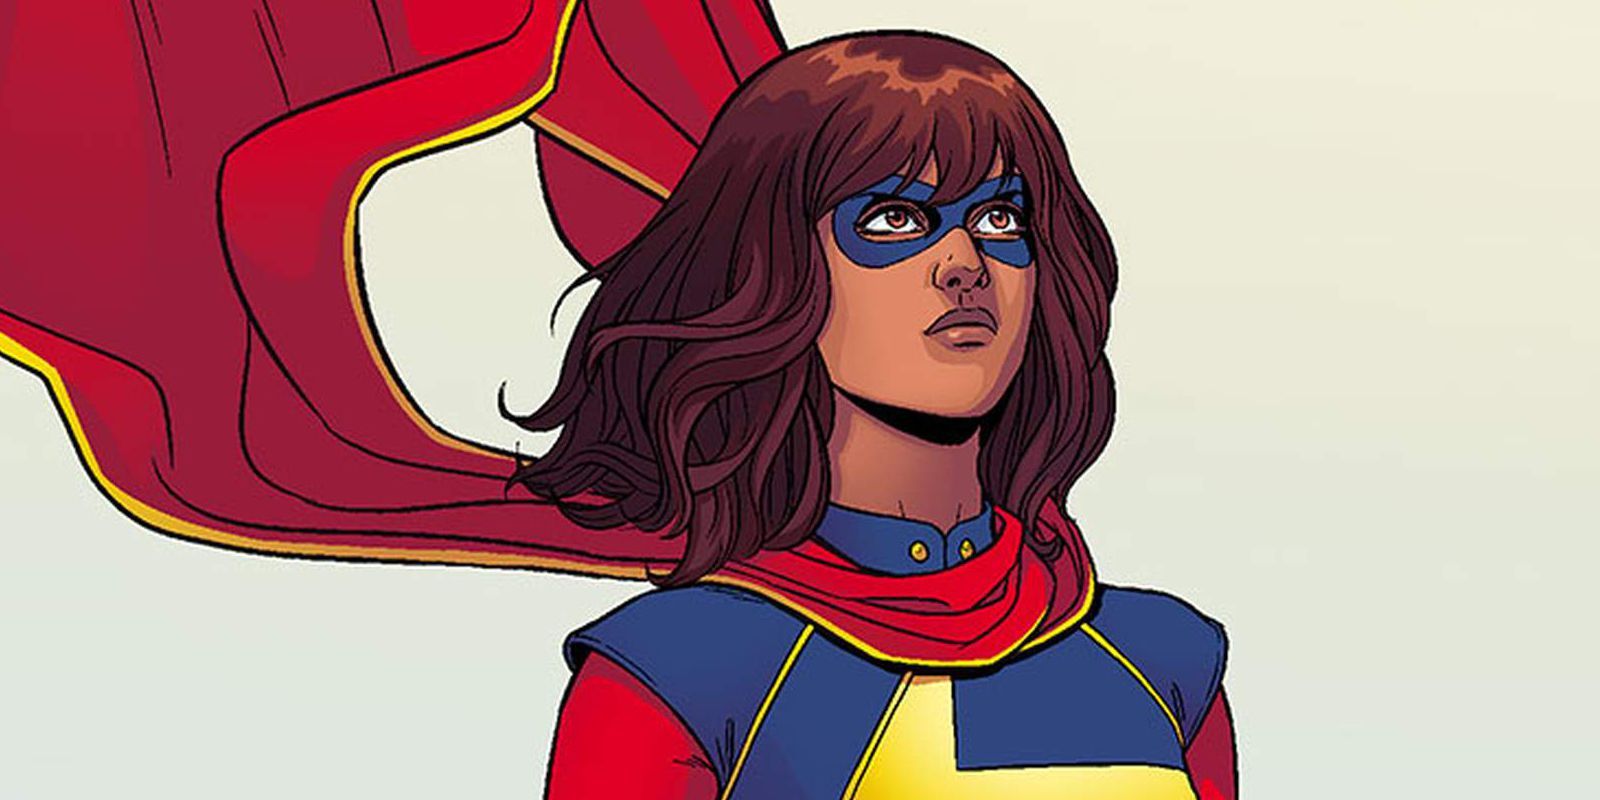 Ms. Marvel poses against a blank background